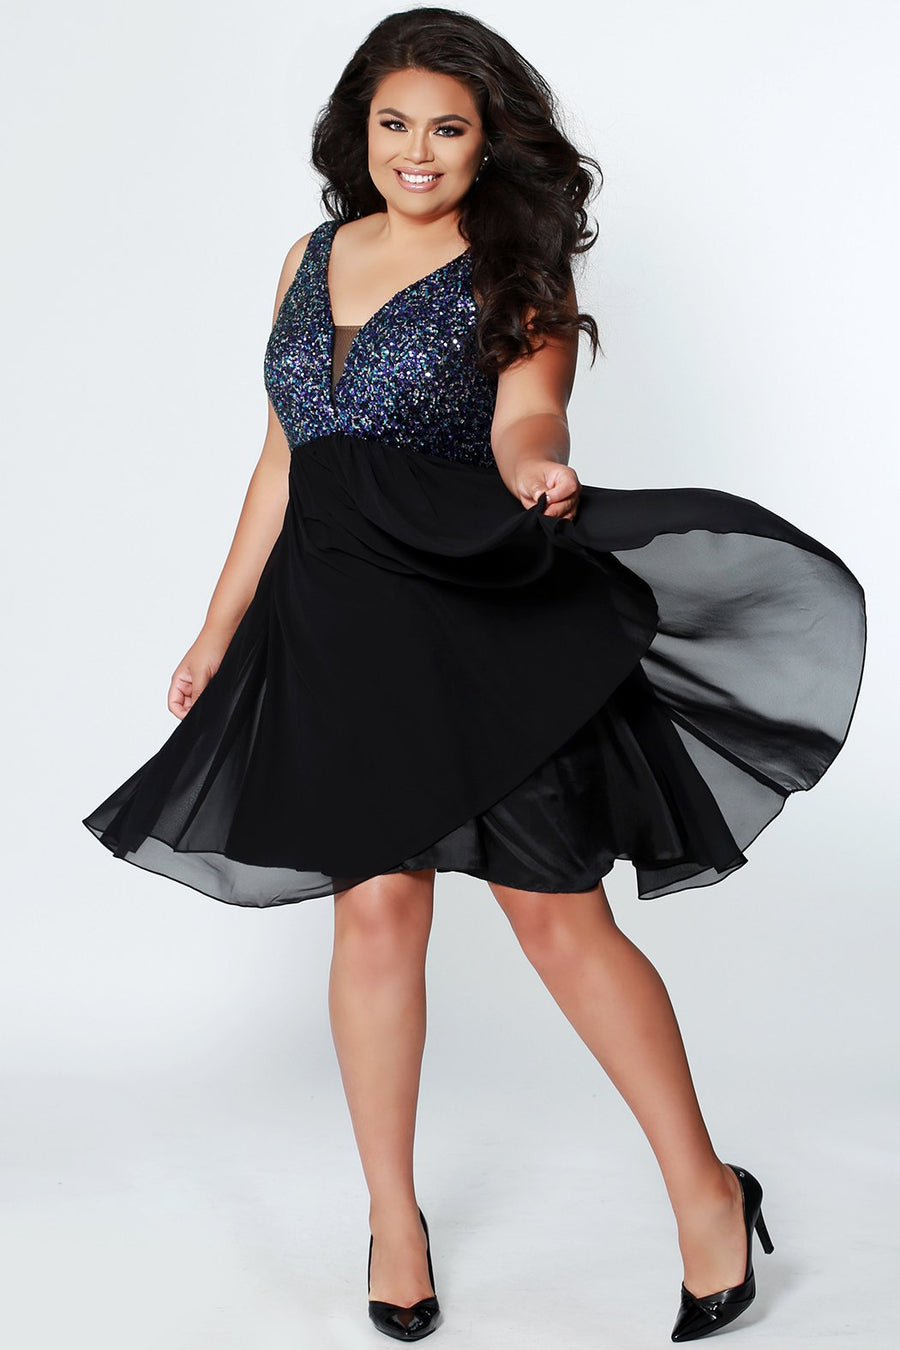 CE1820 has a V-neckline with illusion mesh net is heavily beaded and sequined on front and back. The dress is fully lined, with an A-line chiffon short skirt. It's sleeveless, with bra-friendly straps